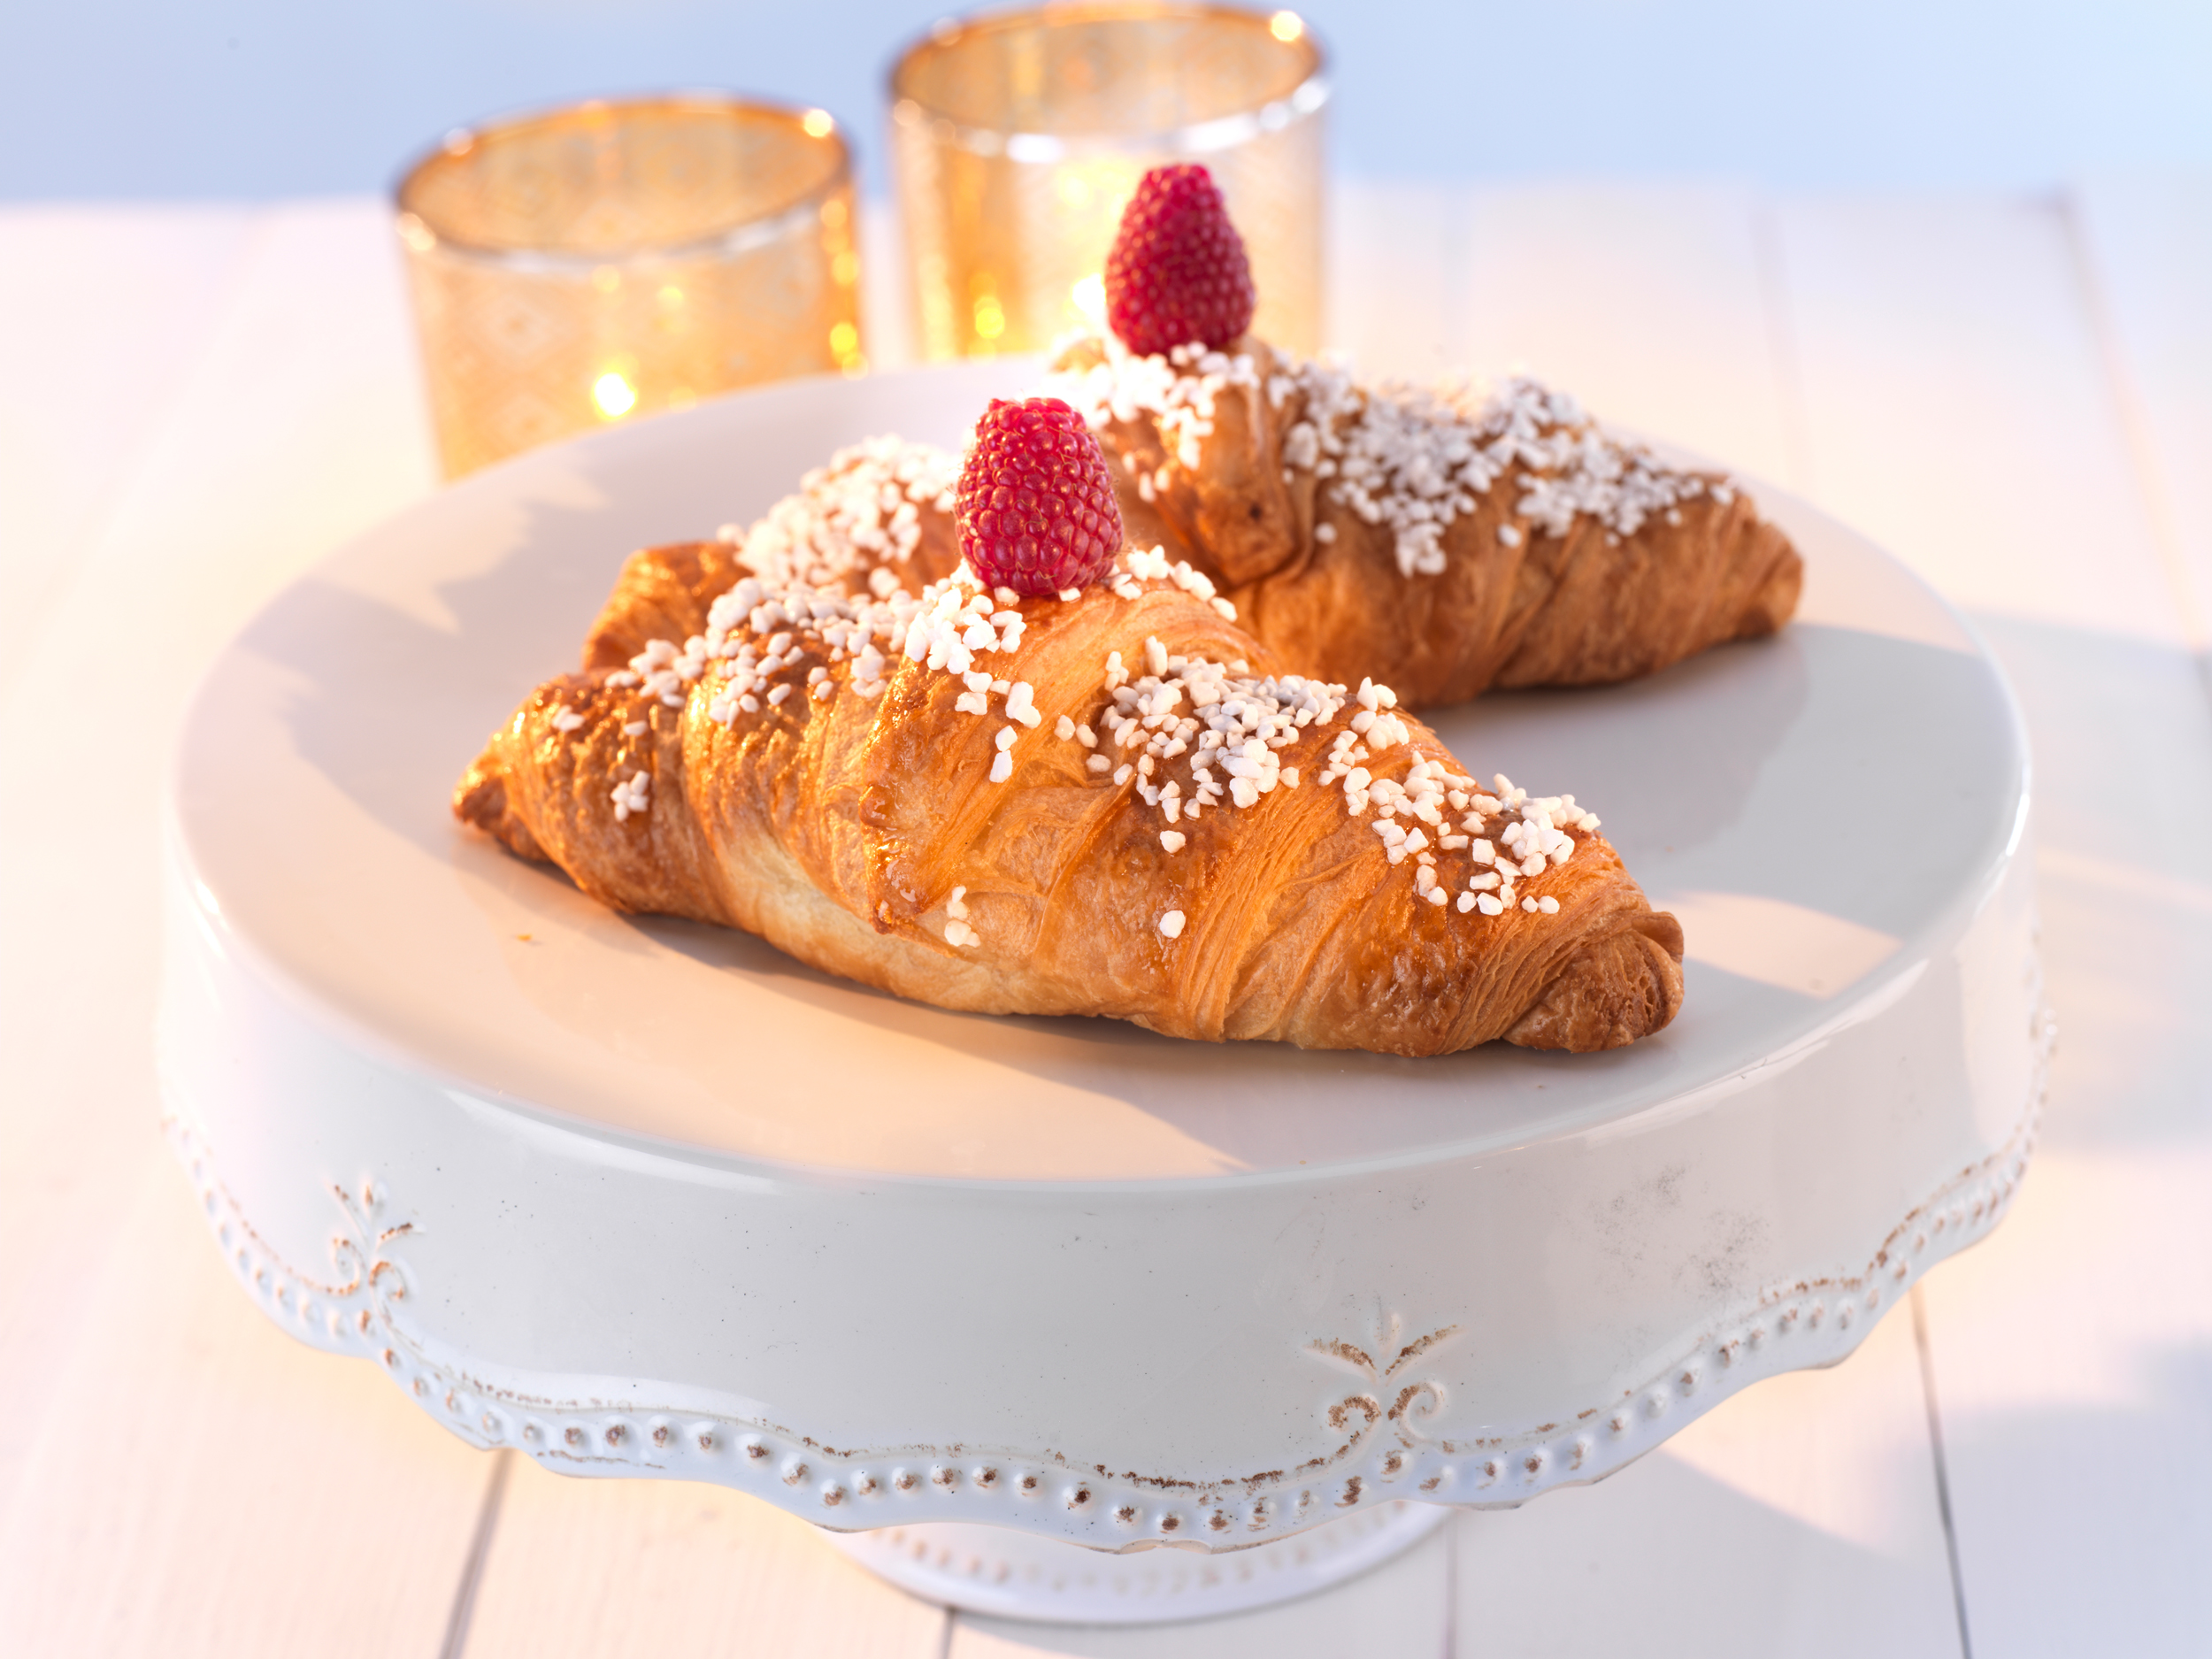 Croissanter with berries